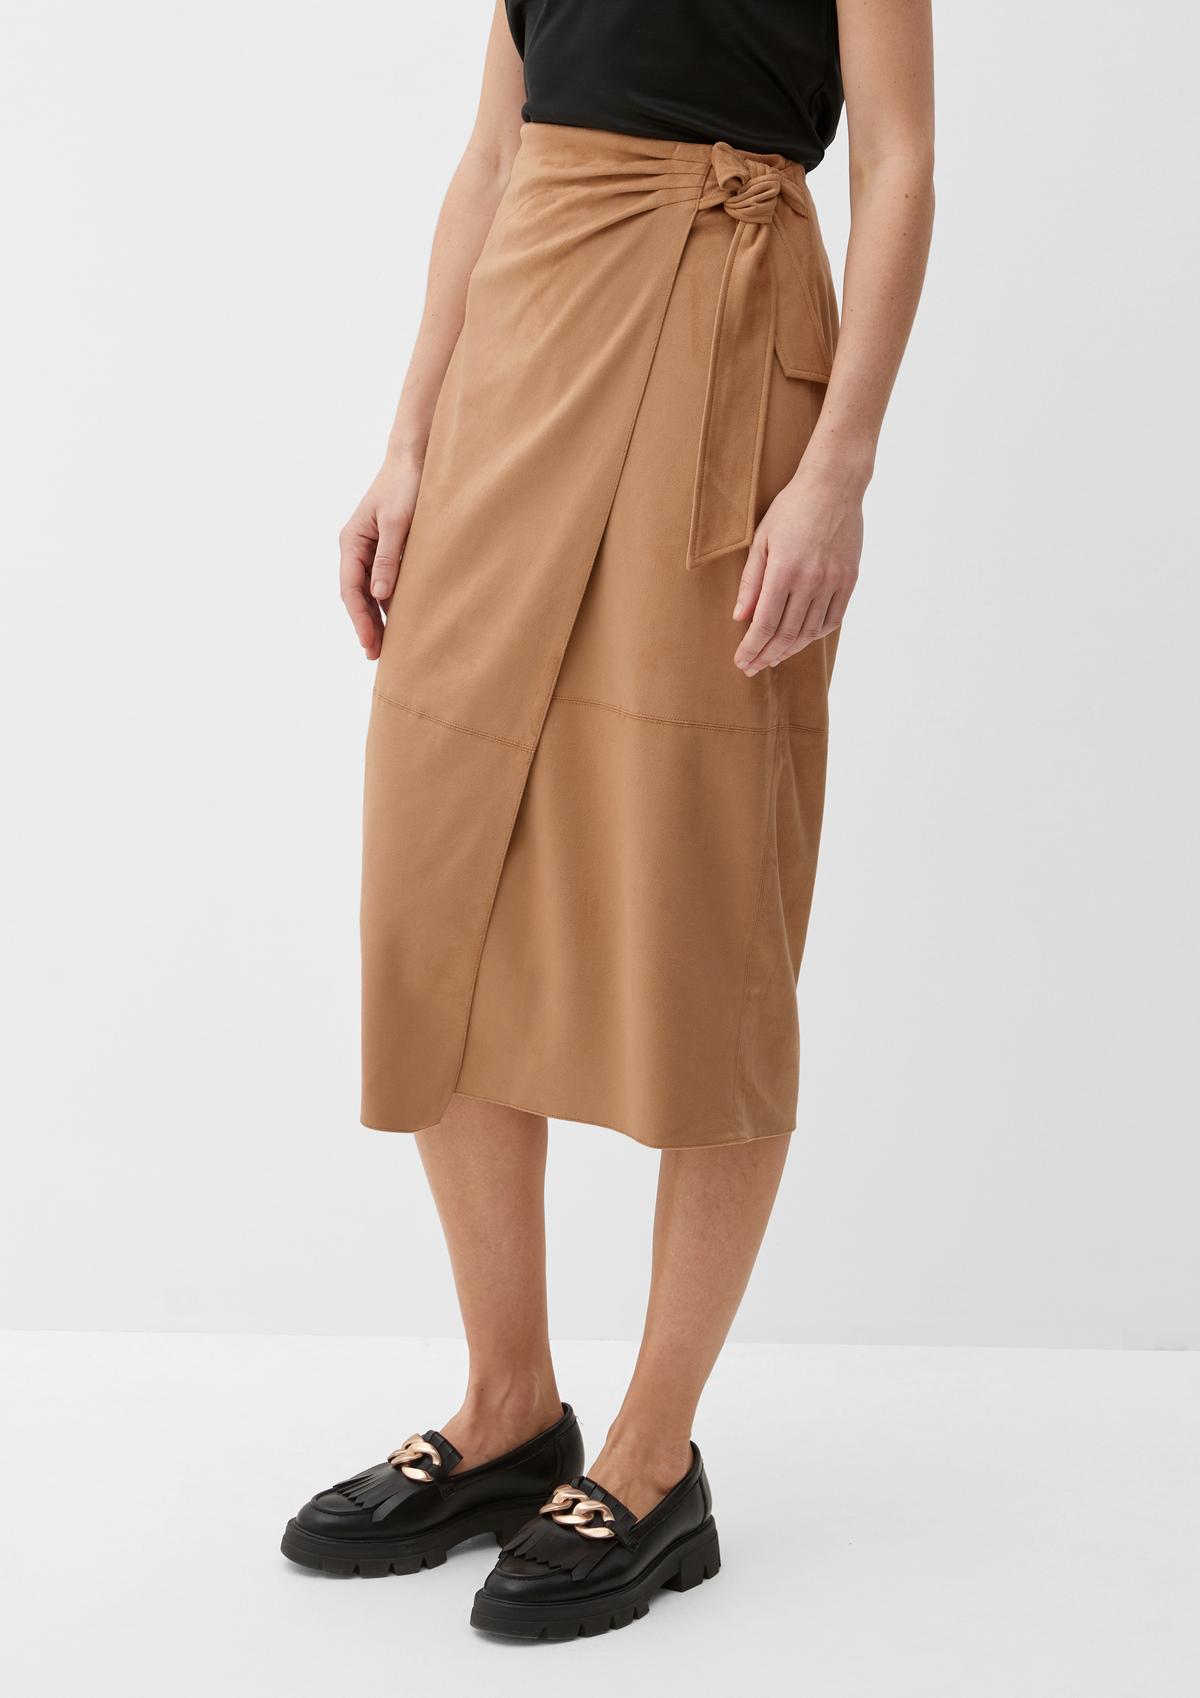 Midi skirt with a suede texture